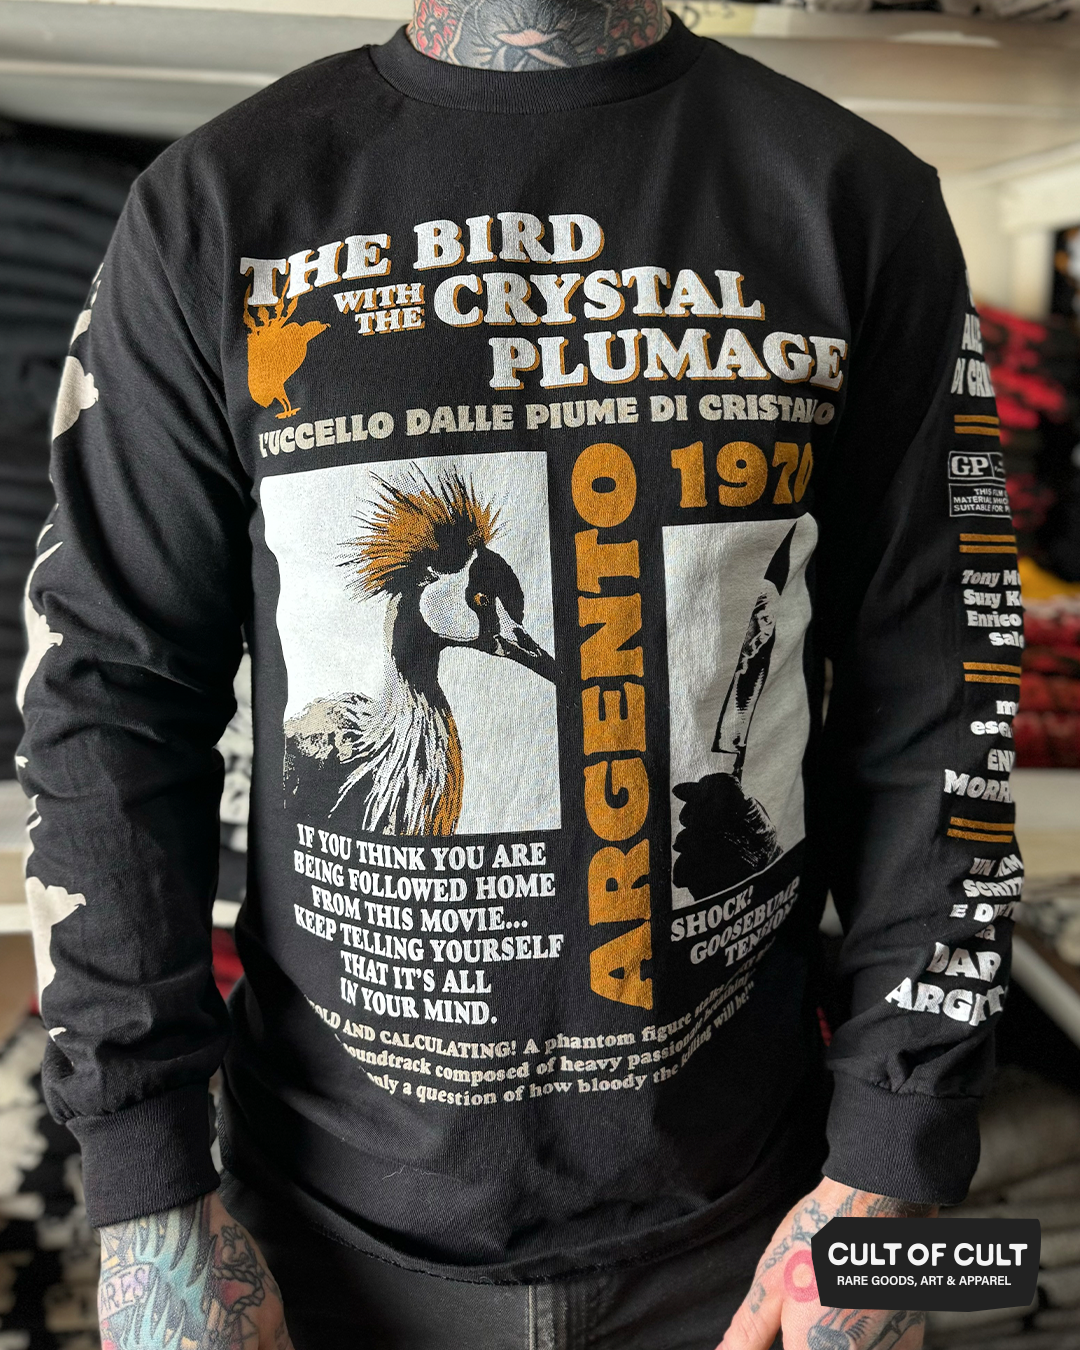 A model wearing The Bird with the Crystal Plumage black long sleeve shirt